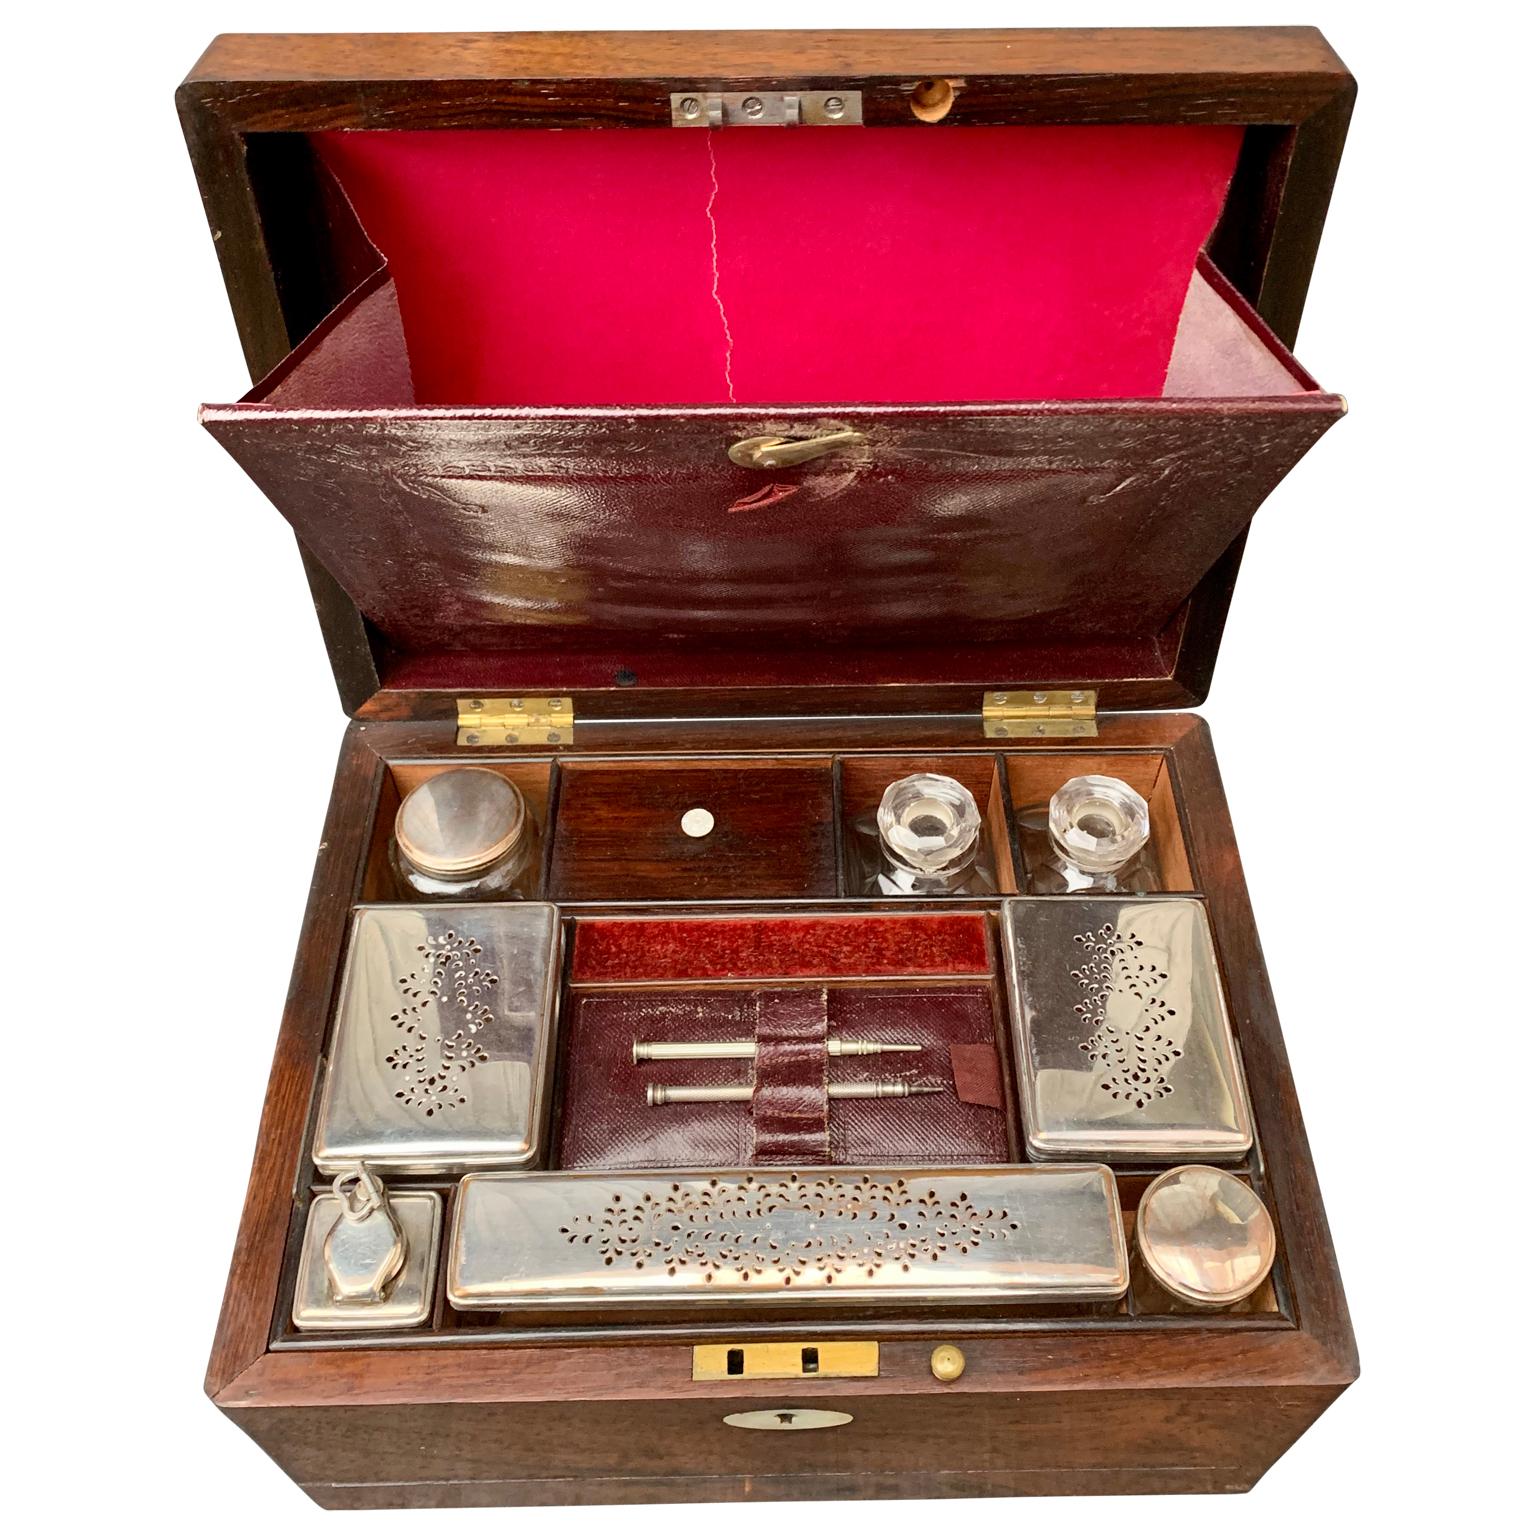 A 19th century oakwood vanity box with different accessories included. The box has the owner's initials of 